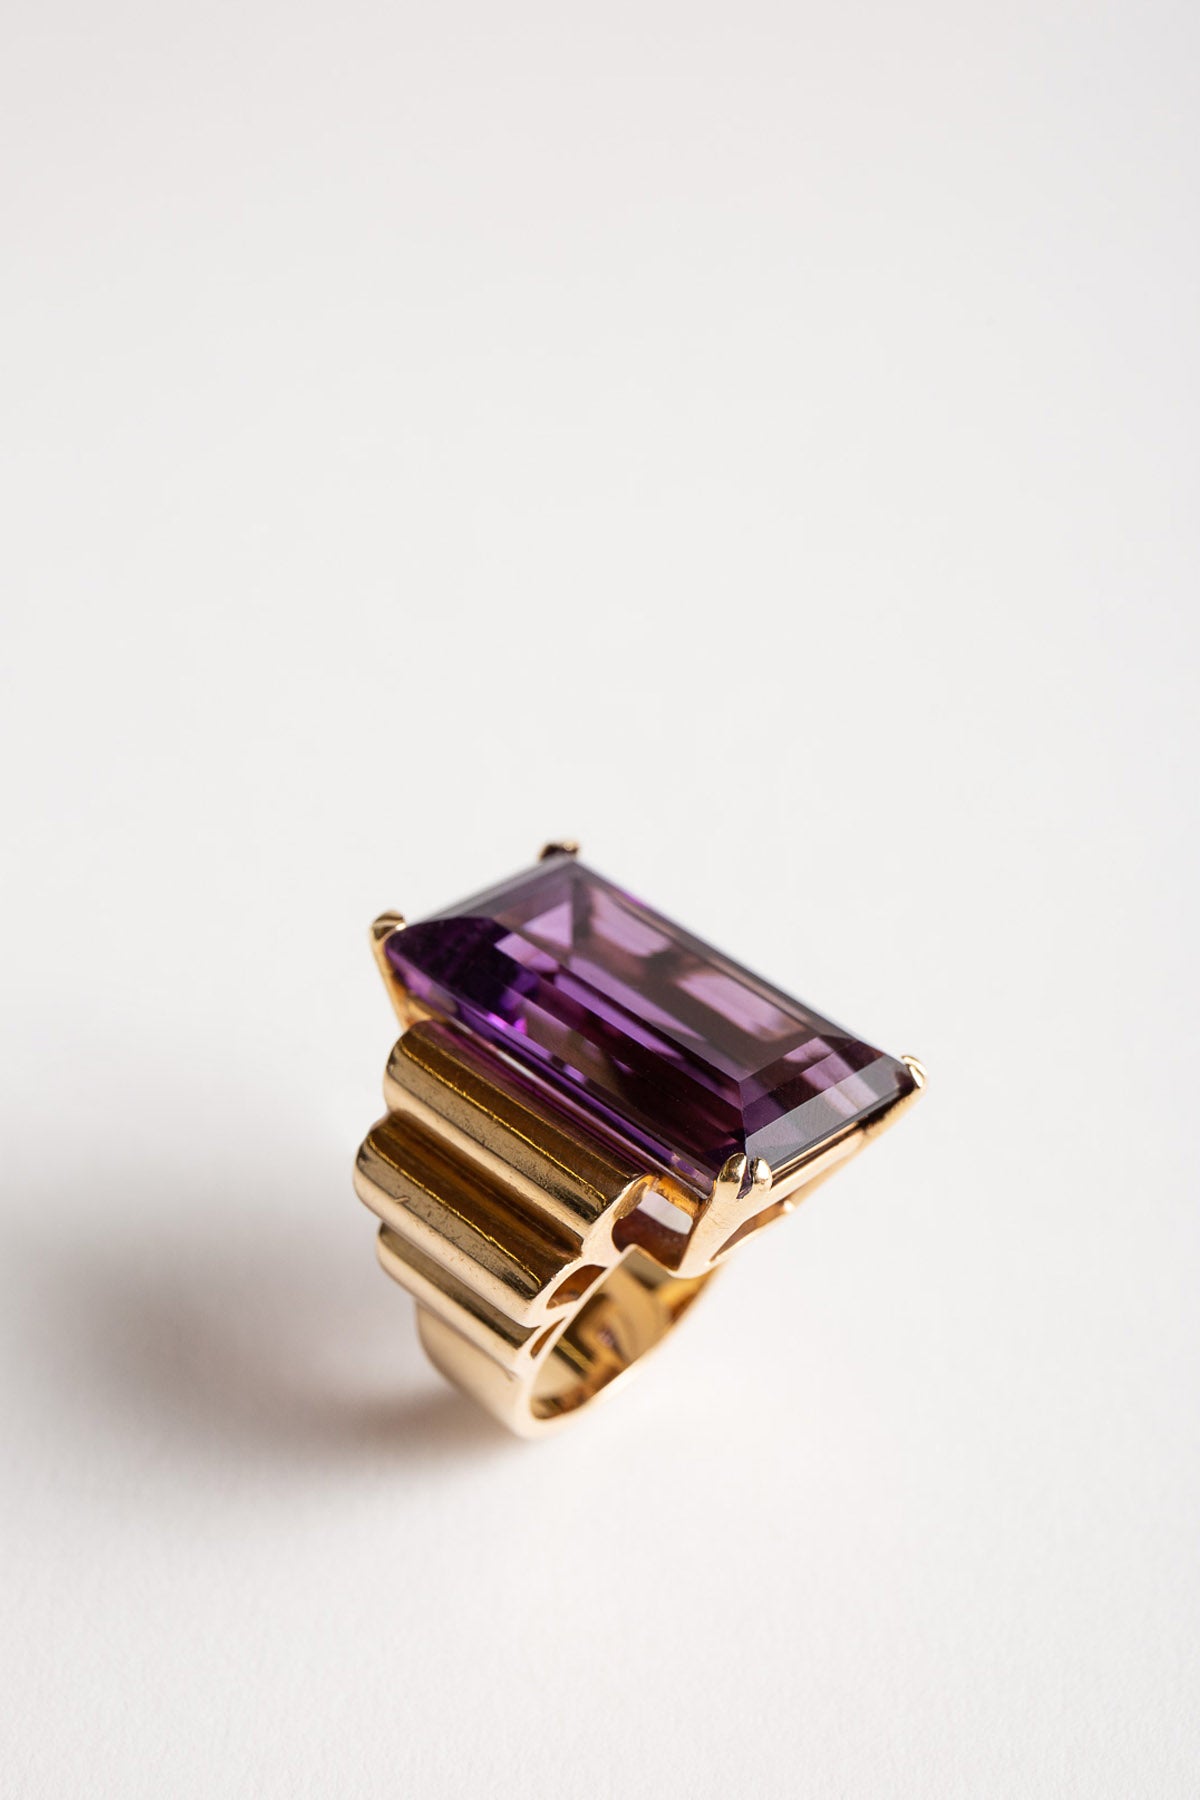 MAXFIELD PRIVATE COLLECTION | 1940'S AMETHYST RING